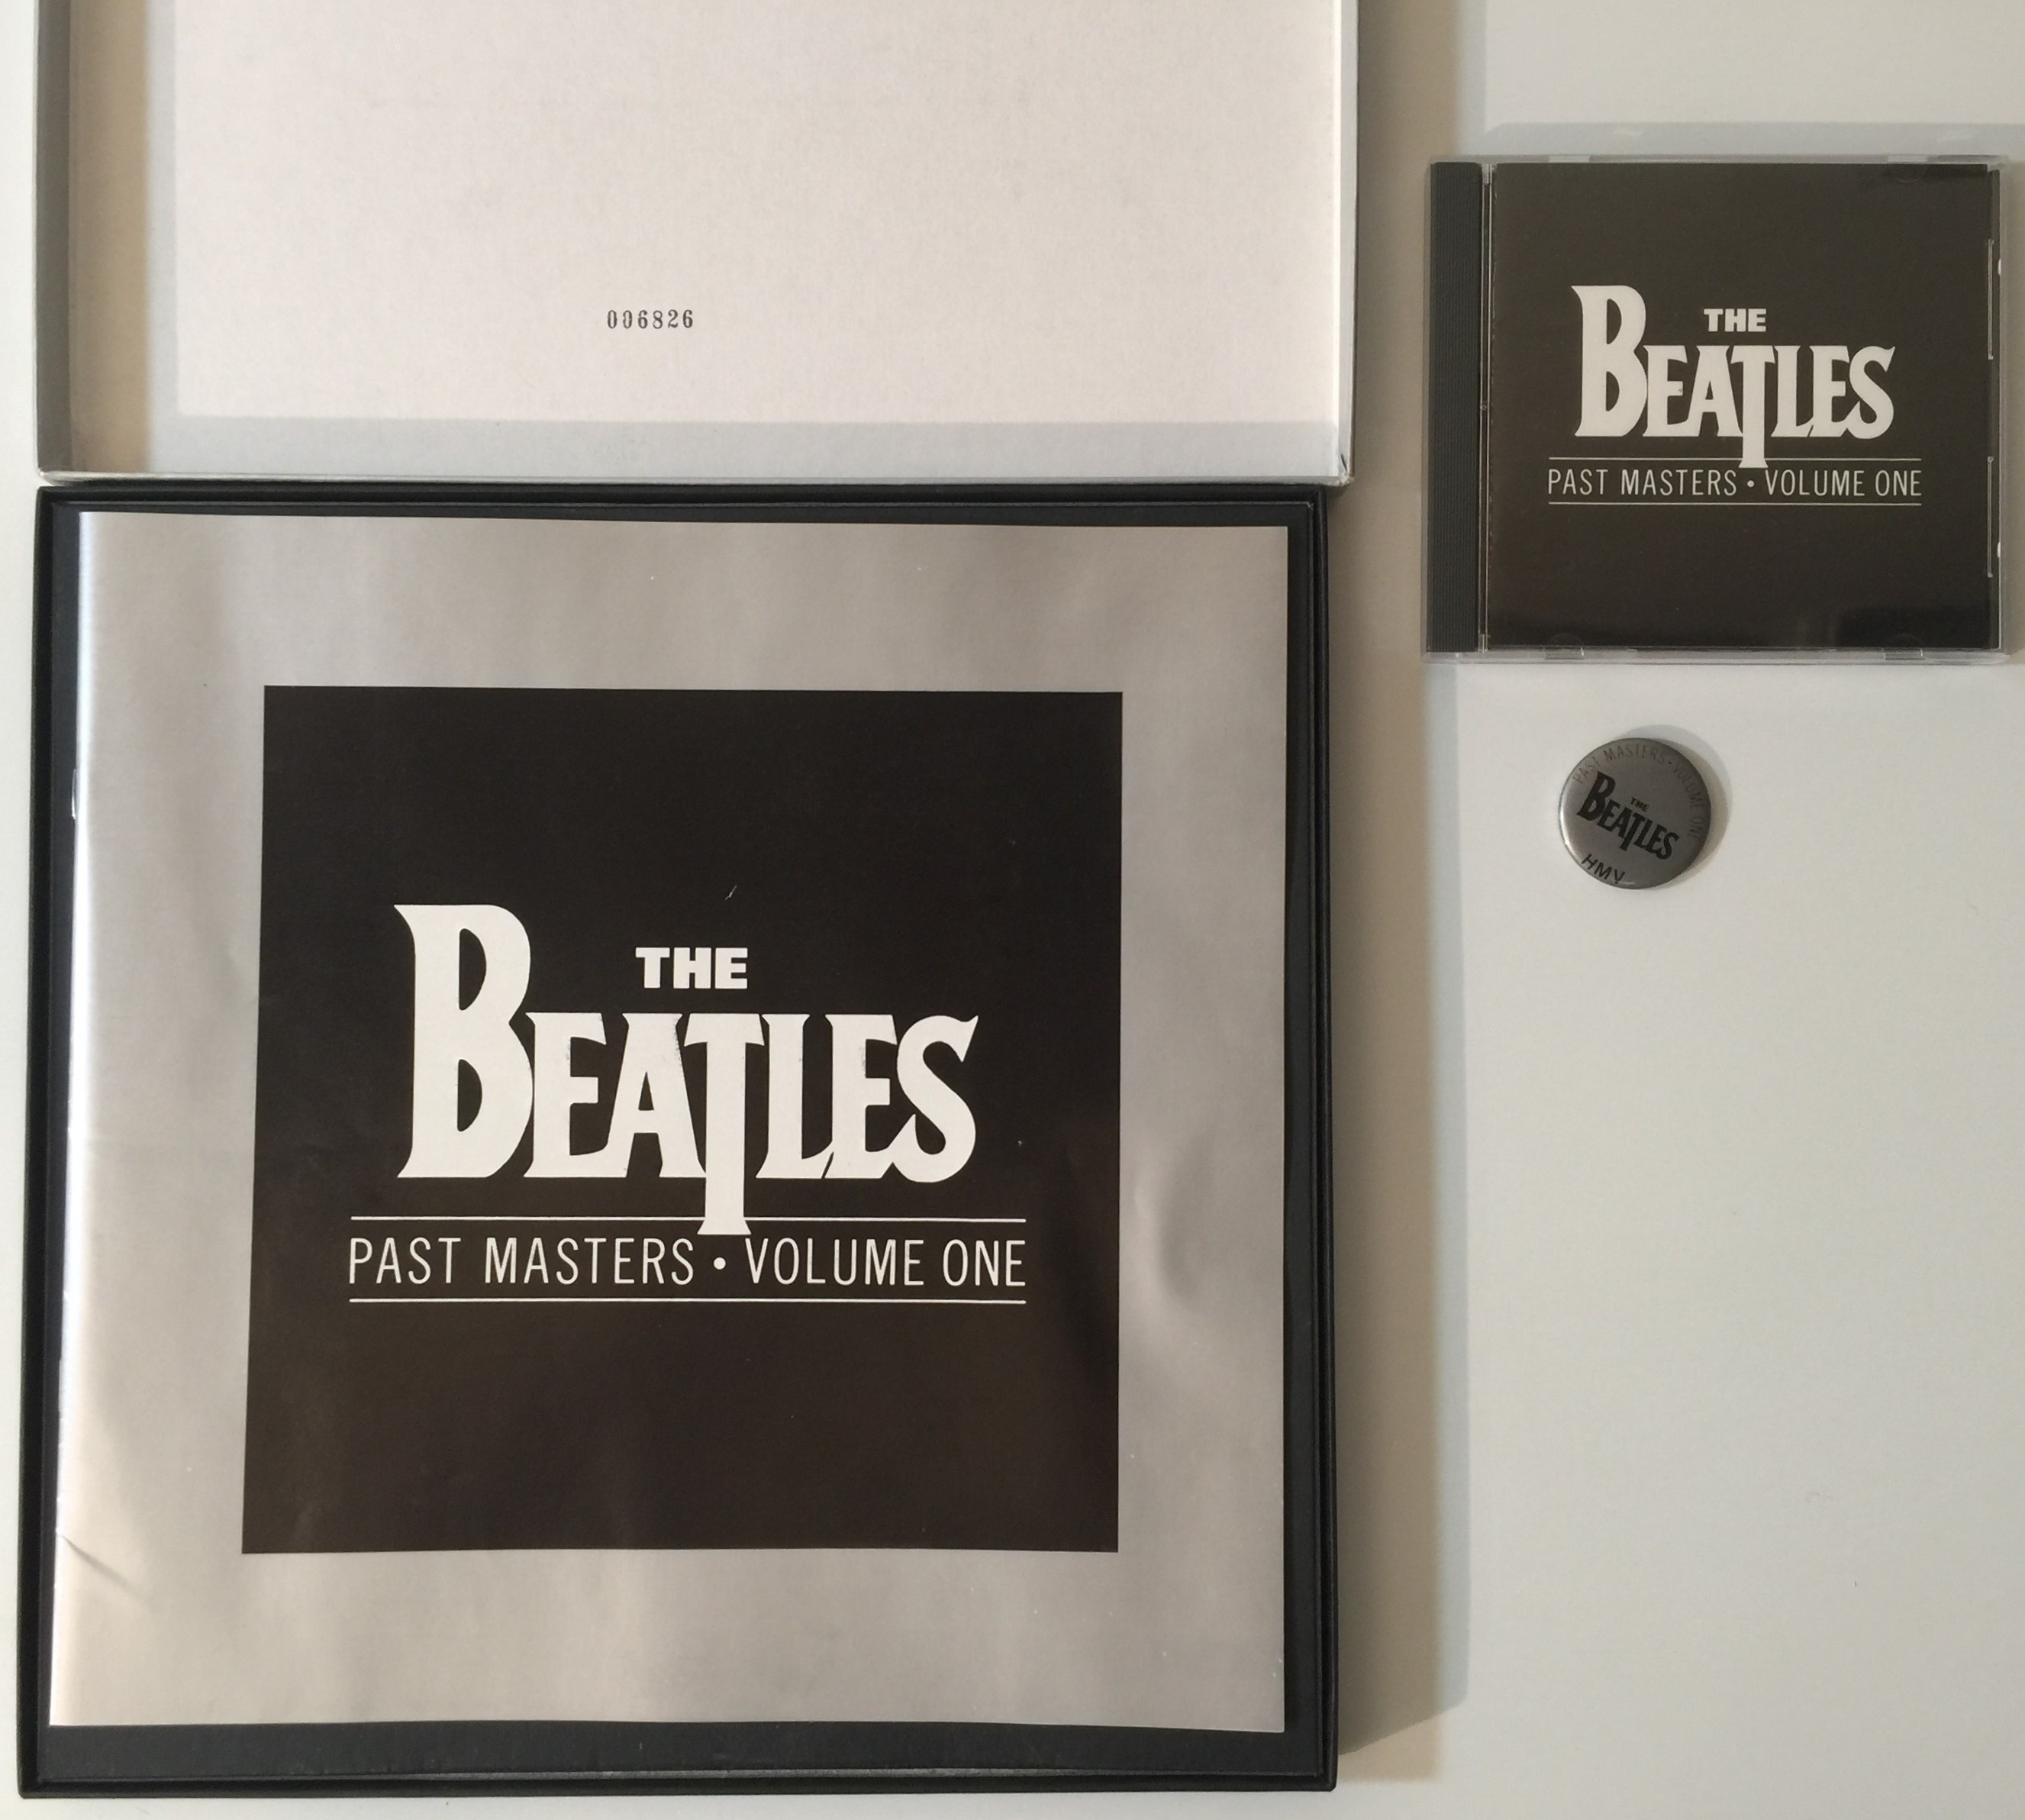 THE BEATLES - ON COMPACT DISC COLLECTION - BOX SETS. - Image 7 of 7